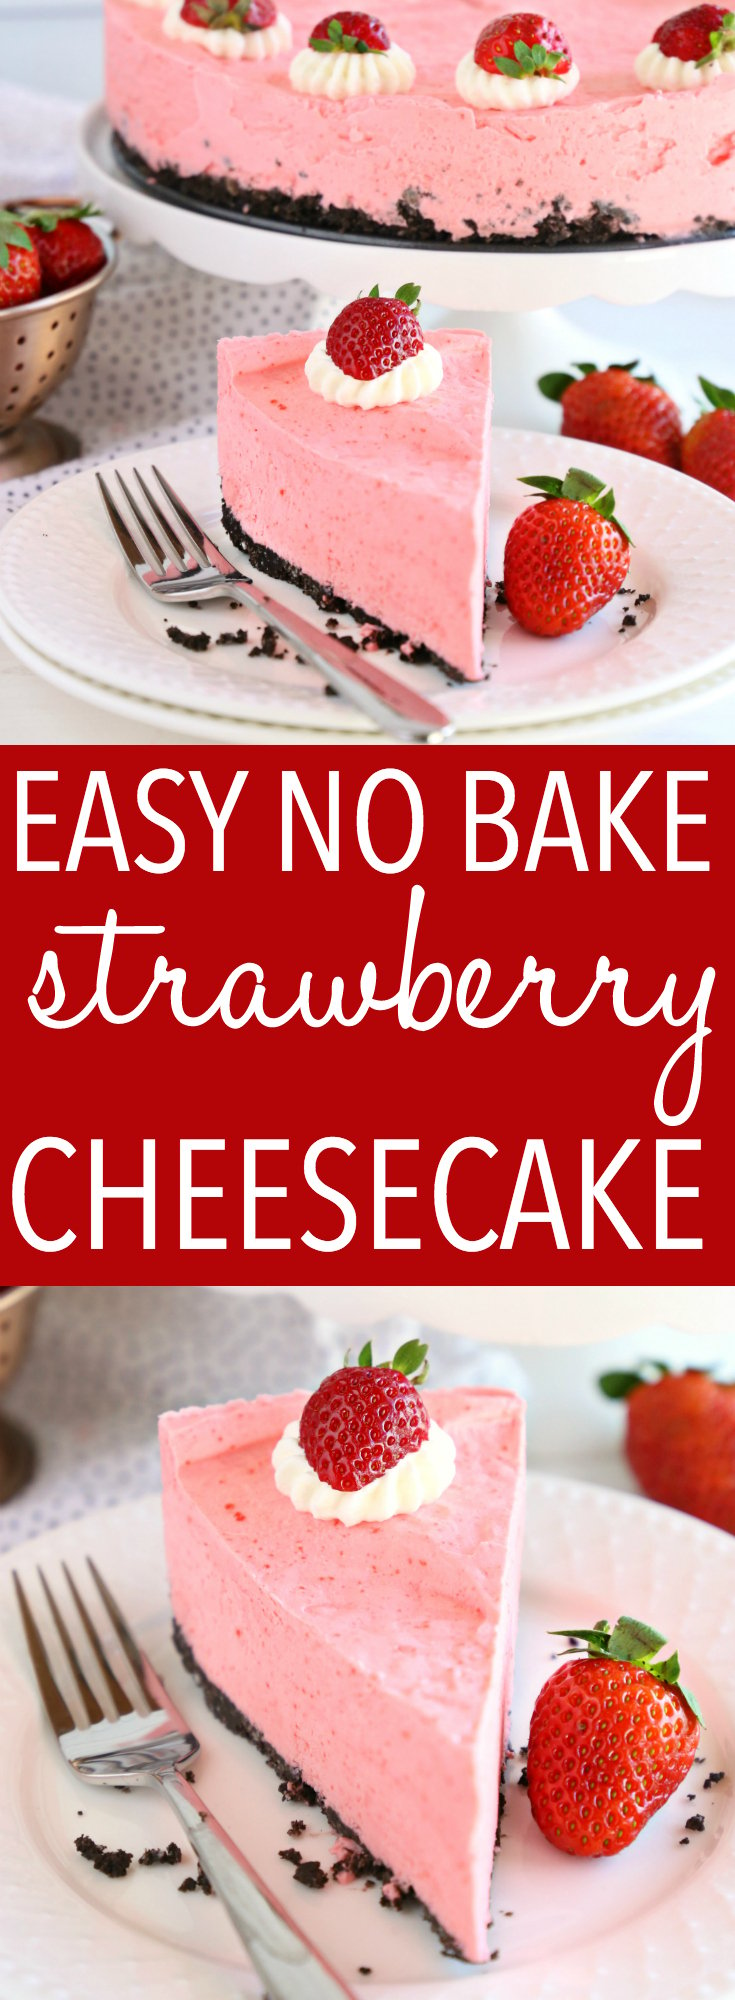 This Easy No Bake Strawberry Cheesecake is the perfect summer no bake dessert that's bursting with fruit flavours! Perfect for barbecues and summer parties! Recipe from thebusybaker.ca! #strawberrycheesecake #nobakestrawberrydessert #summerdesserts via @busybakerblog